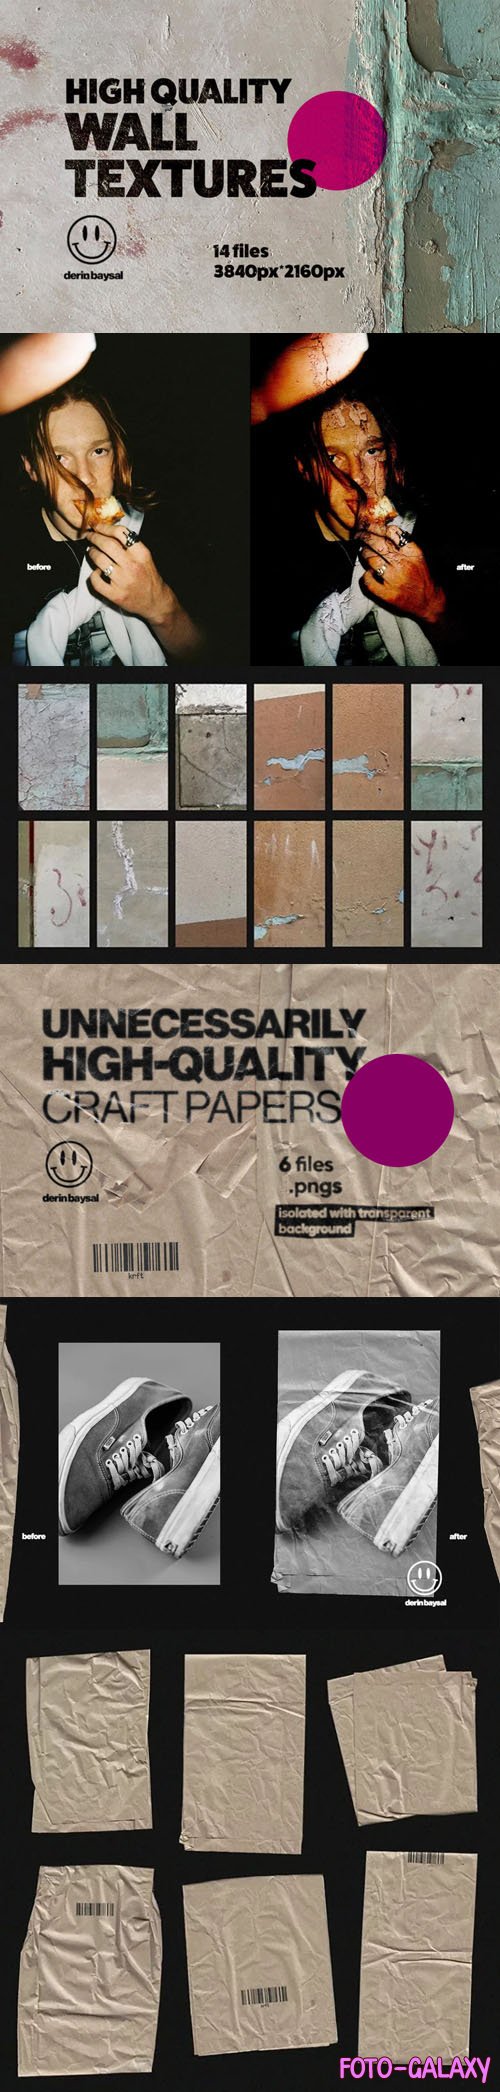 Craft Papers & Urban Wall Textures Pack